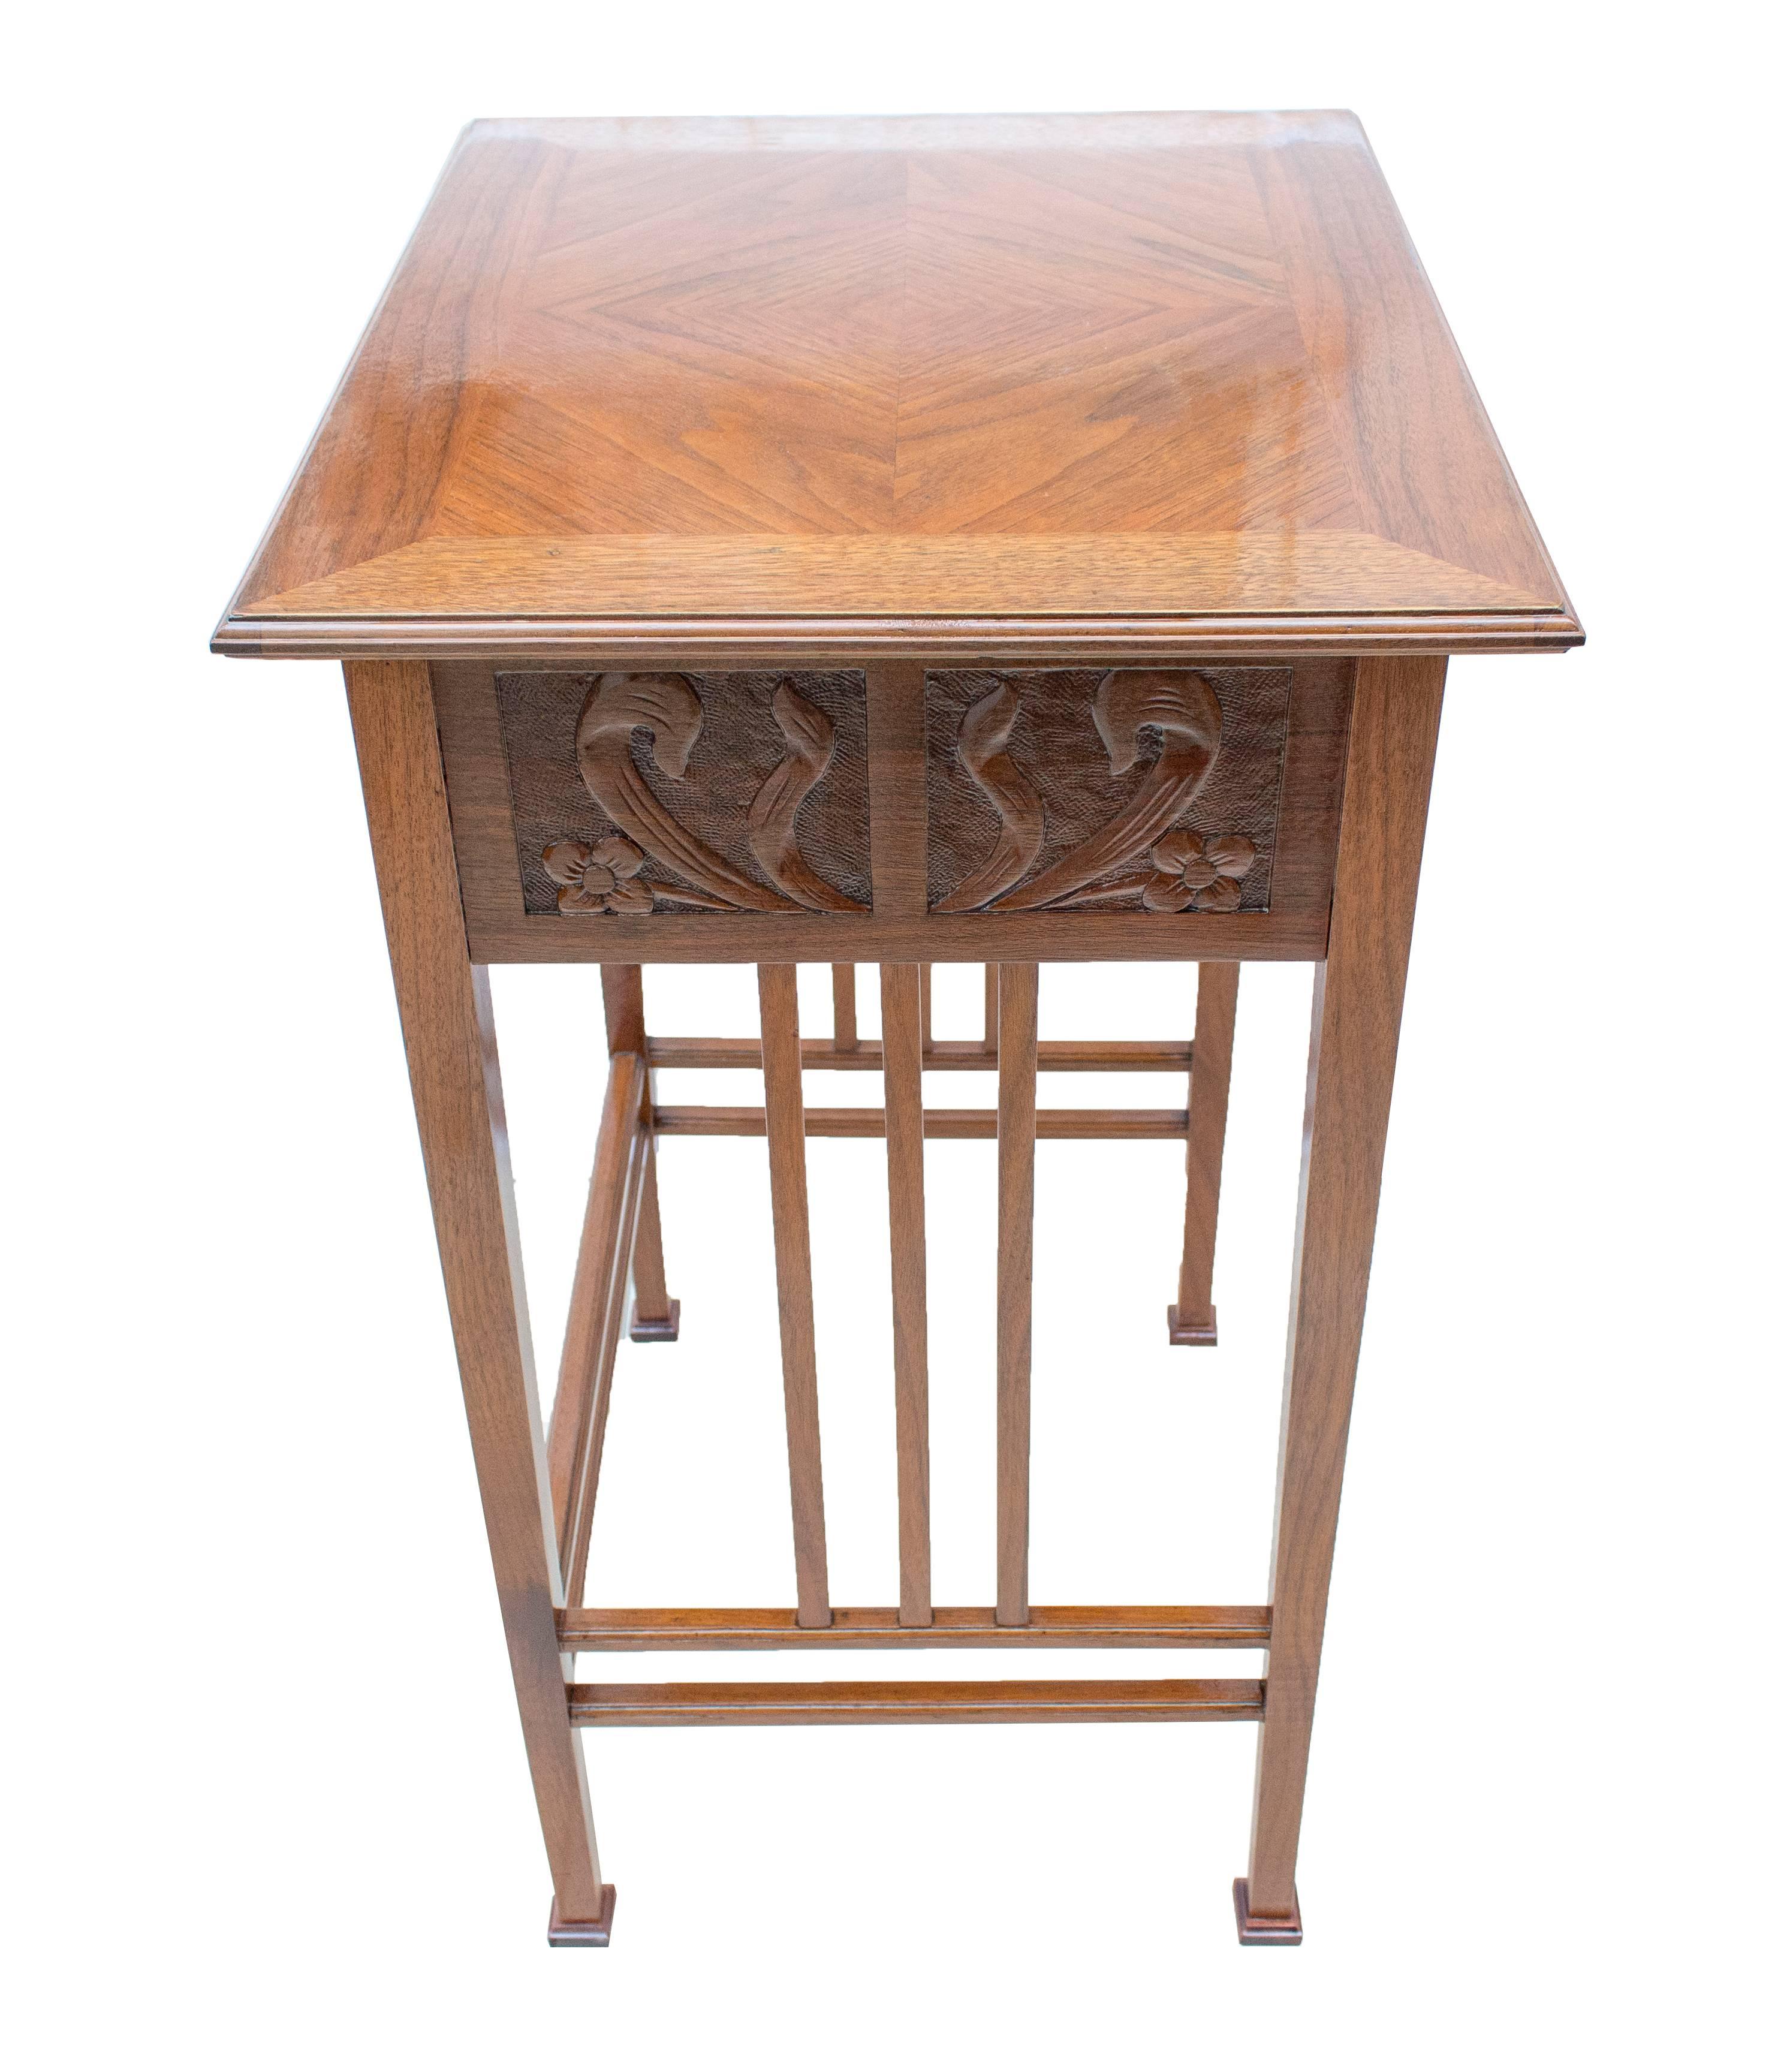 German Art Nouveau Walnut Sewing or Side Table For Sale